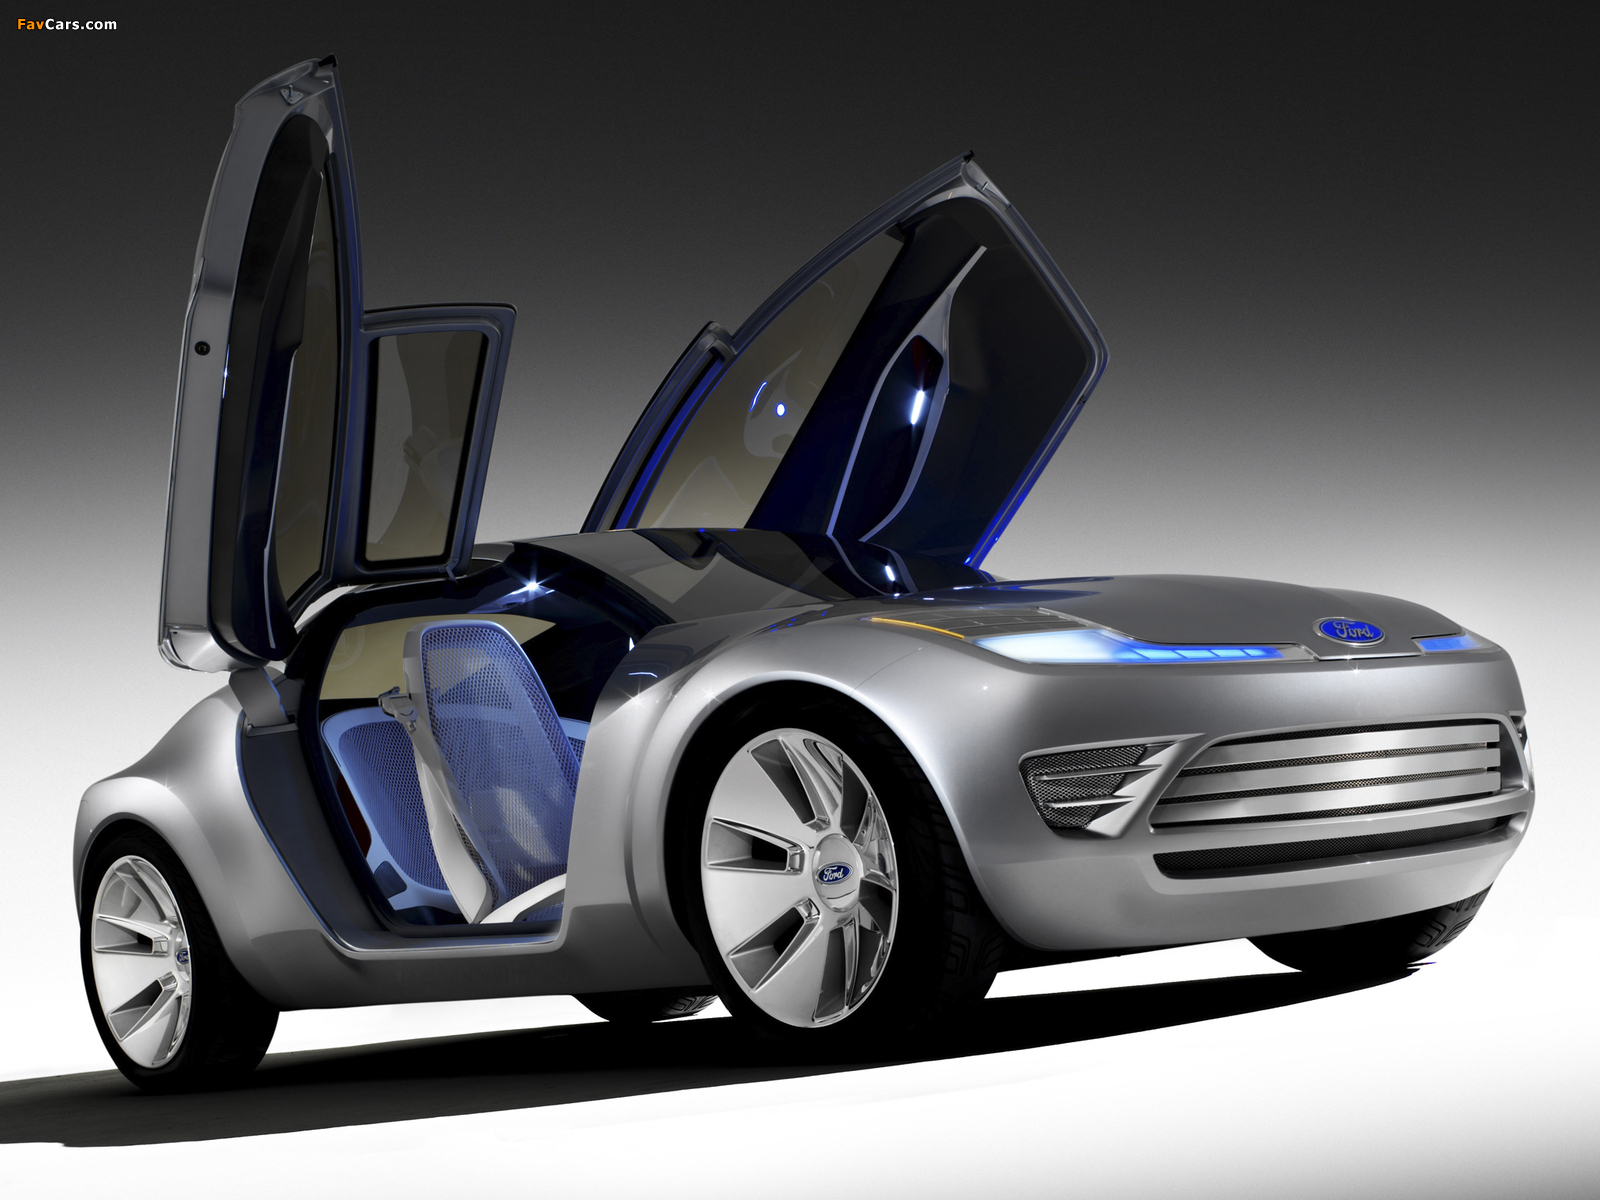 Ford Reflex Concept 2006 pictures (1600 x 1200)